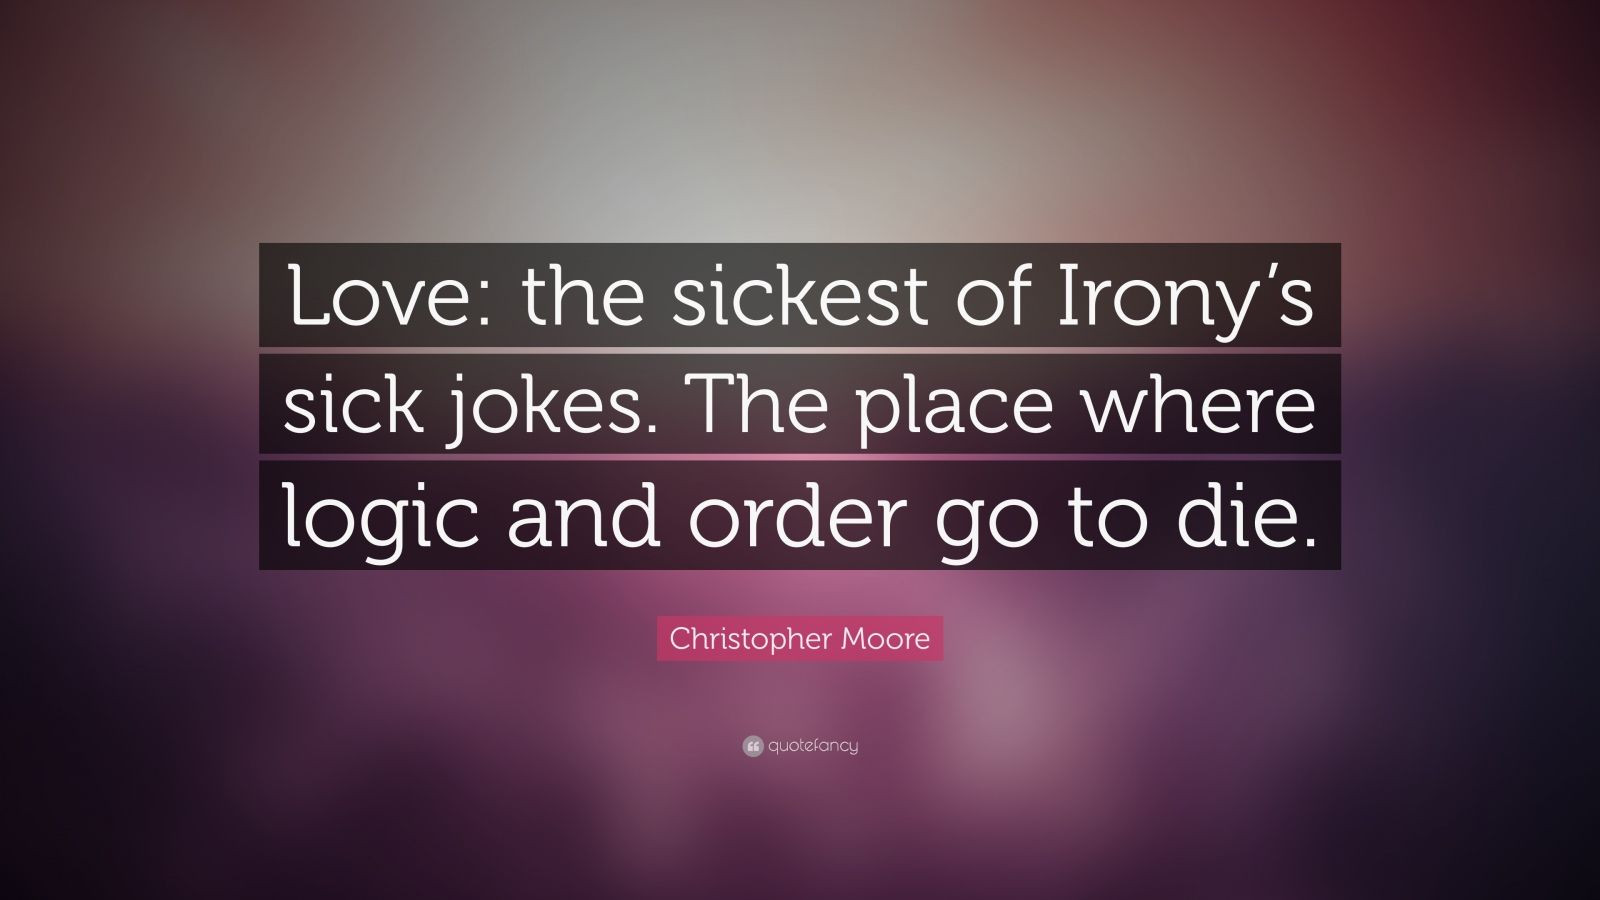 Logic Quotes About Love
 Christopher Moore Quote “Love the sickest of Irony’s